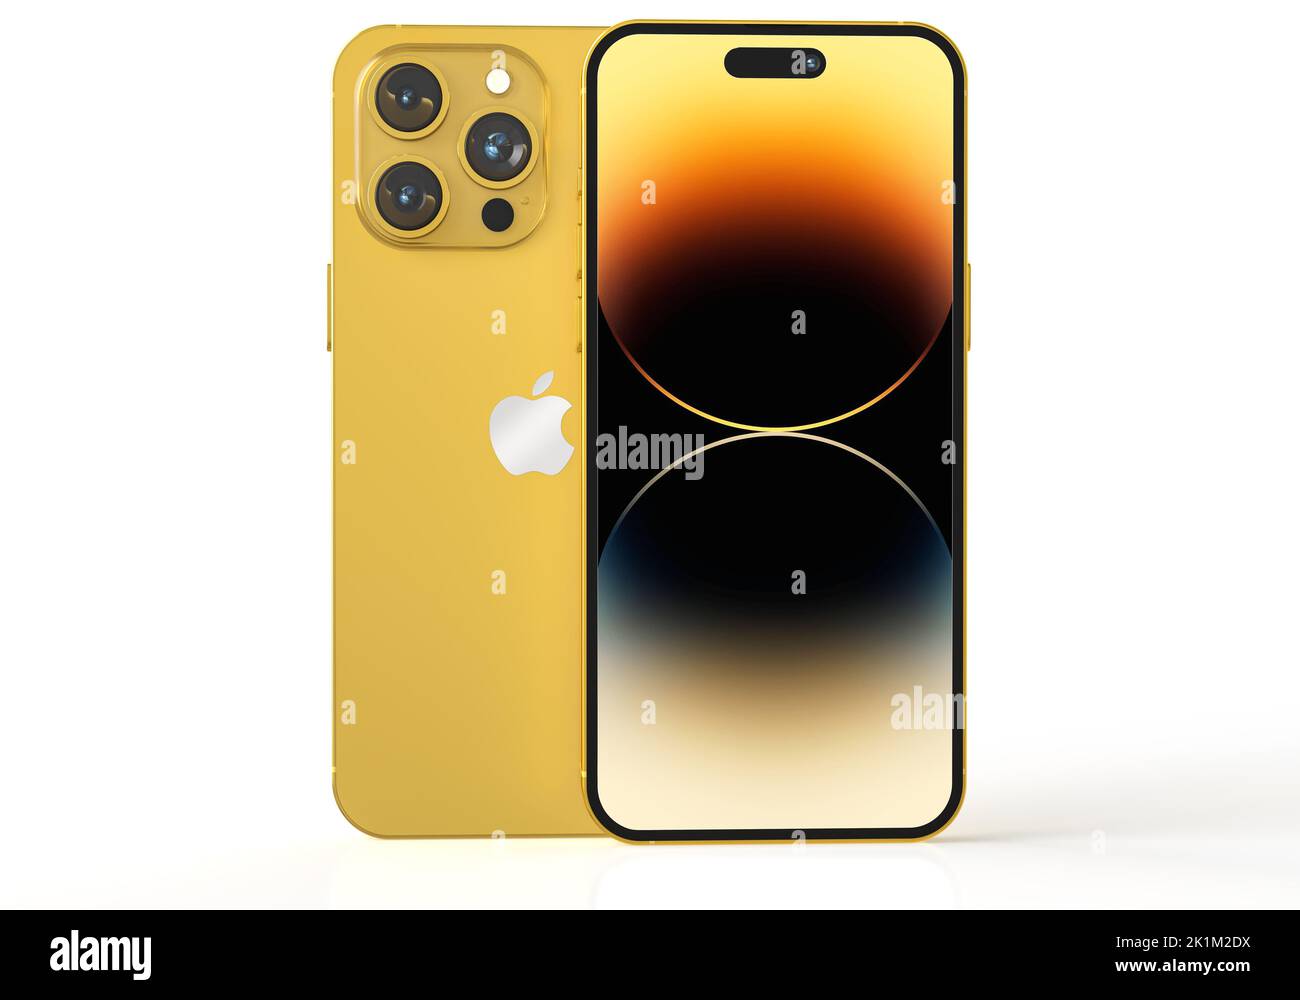 Realistic IPhone 14 Pro Max set with front and back view studio shot : Bangkok, Thailand - SEP 16, 2022 Stock Photo